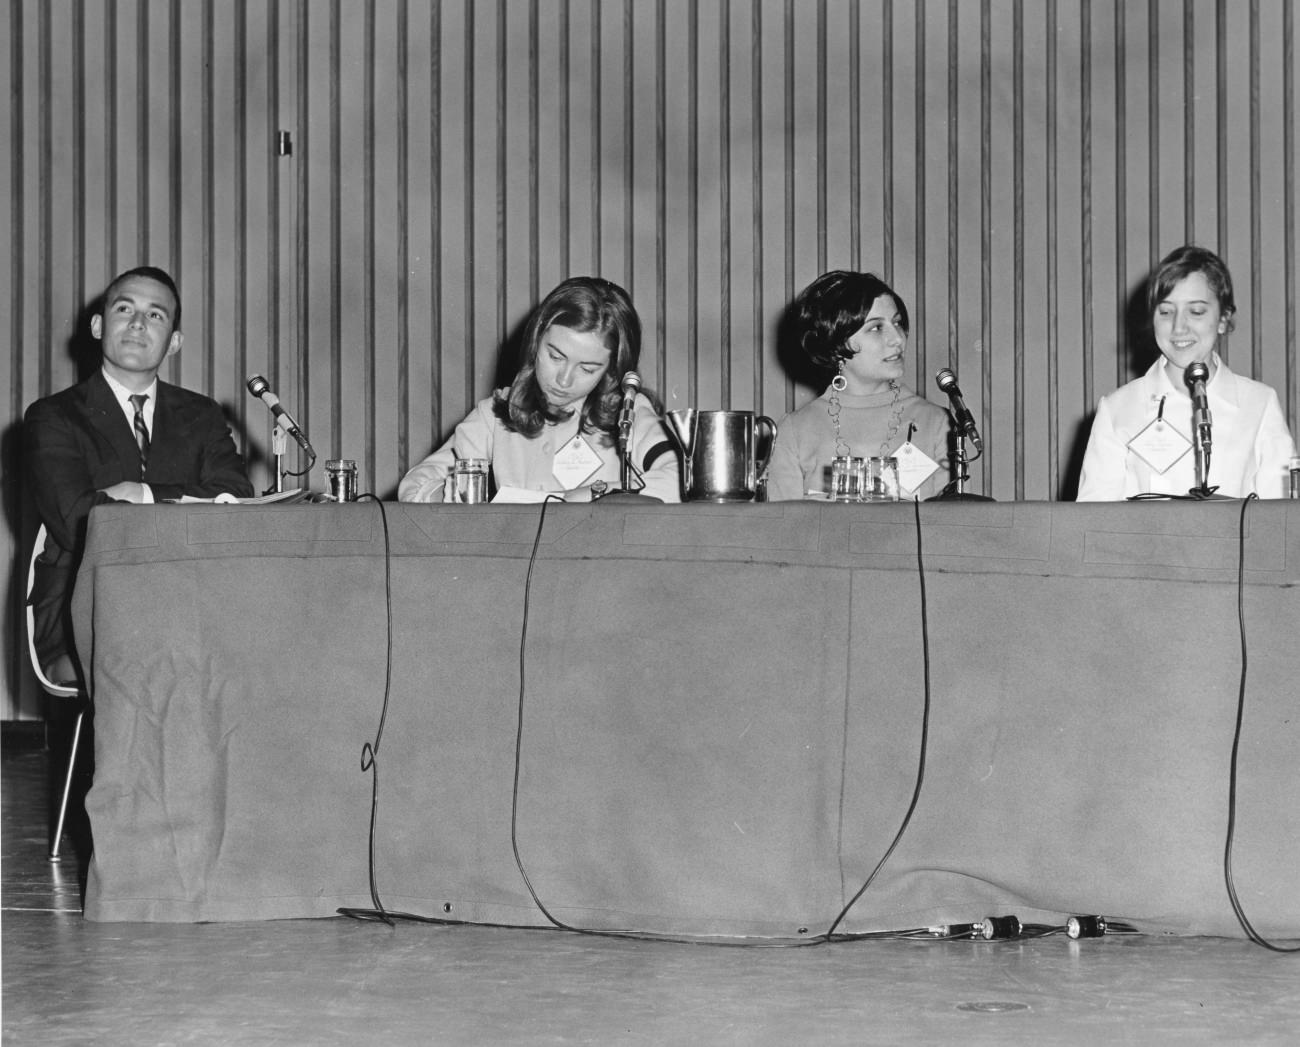 Hillary joins students and a faculty member at the Wellesley College Alumnae Council Student Panel, 1968